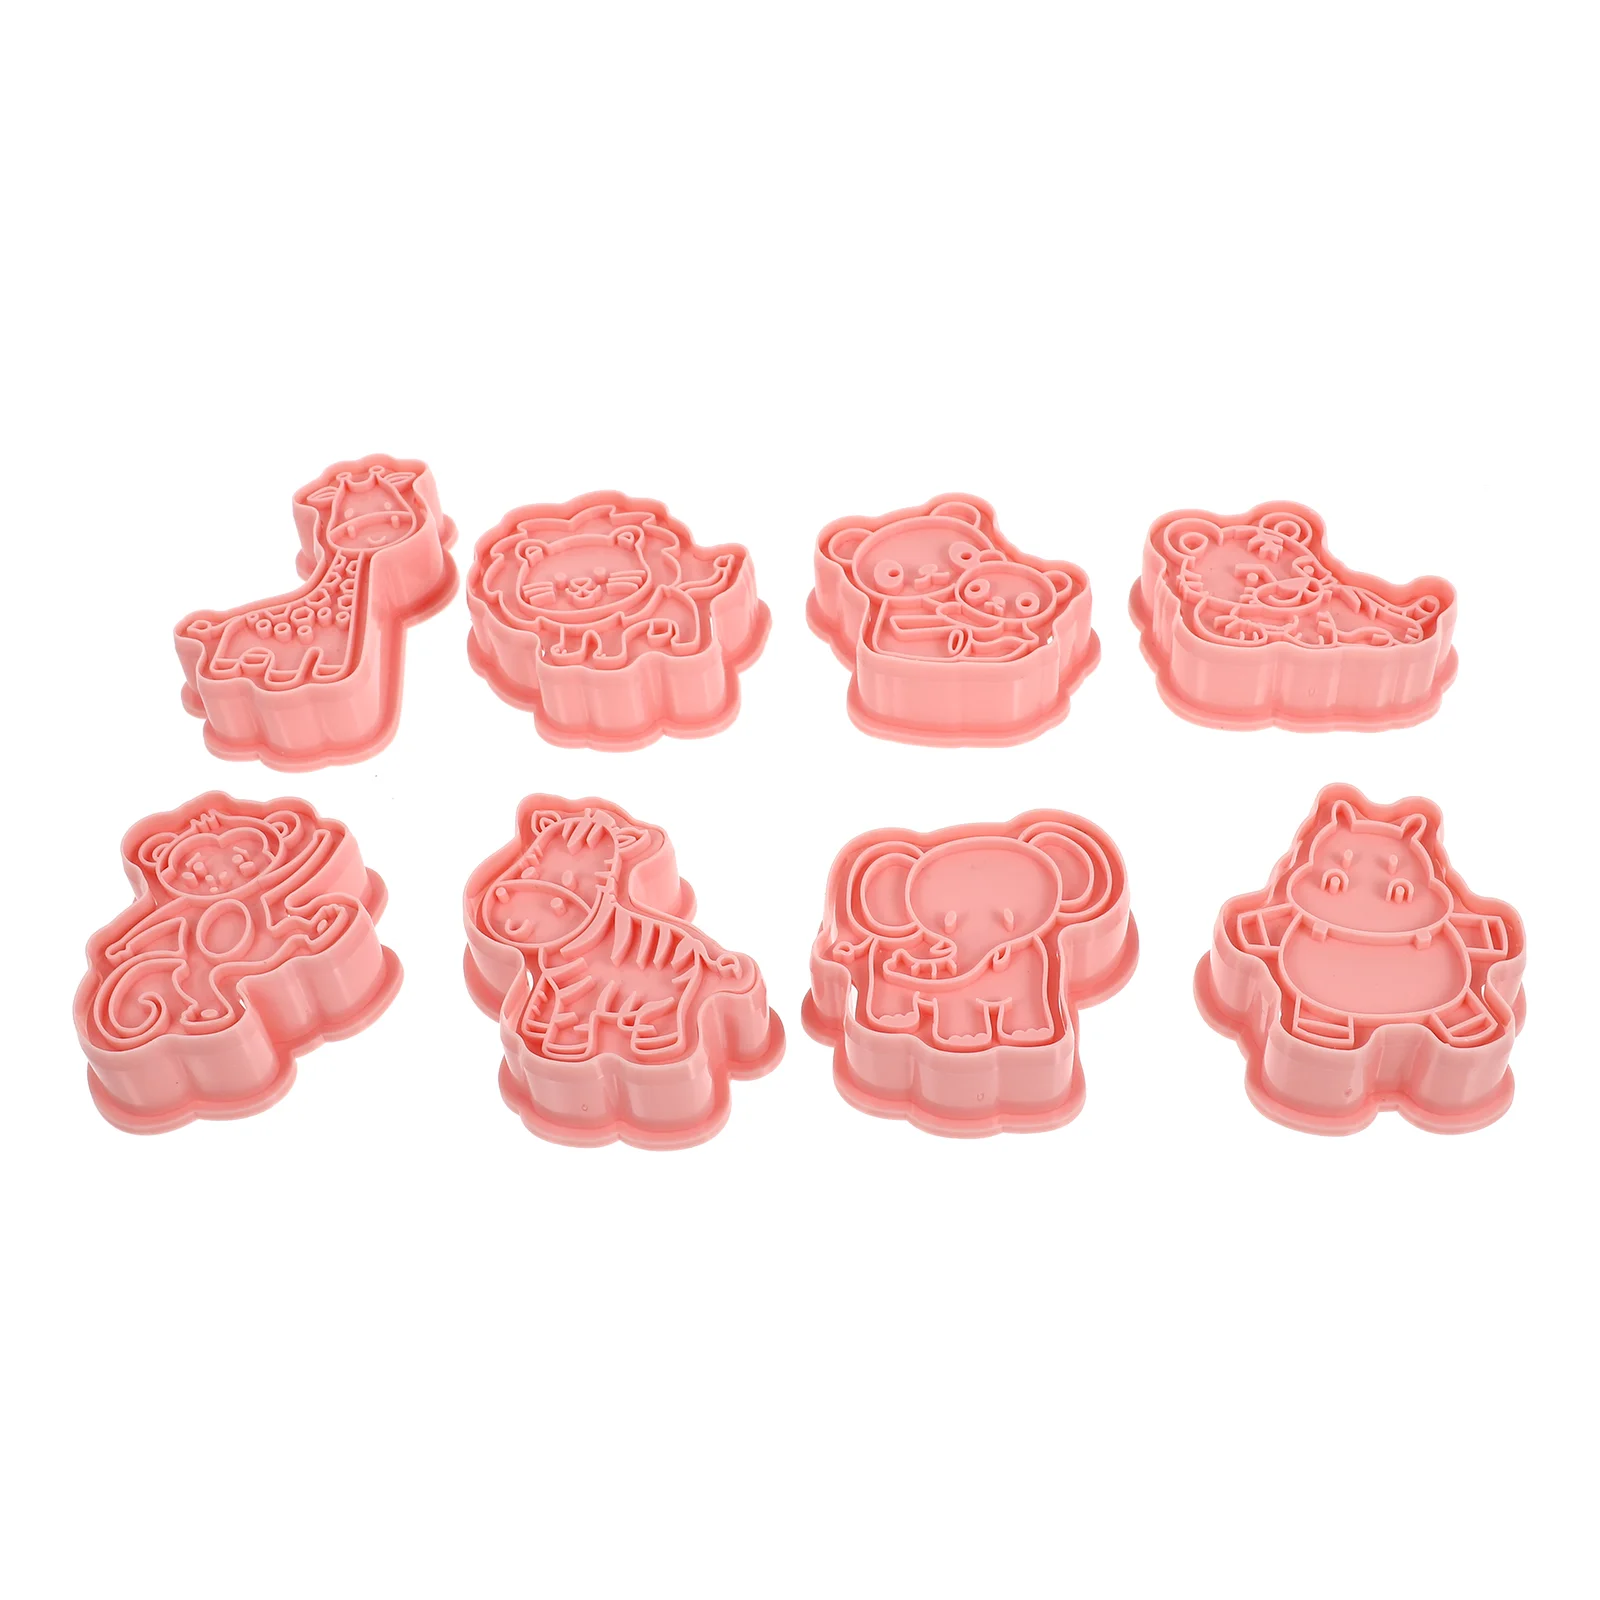 

8 Pcs Animal Cookie Cutters Molds Cake Household Baking Tools DIY Biscuits Pressing Chocolate